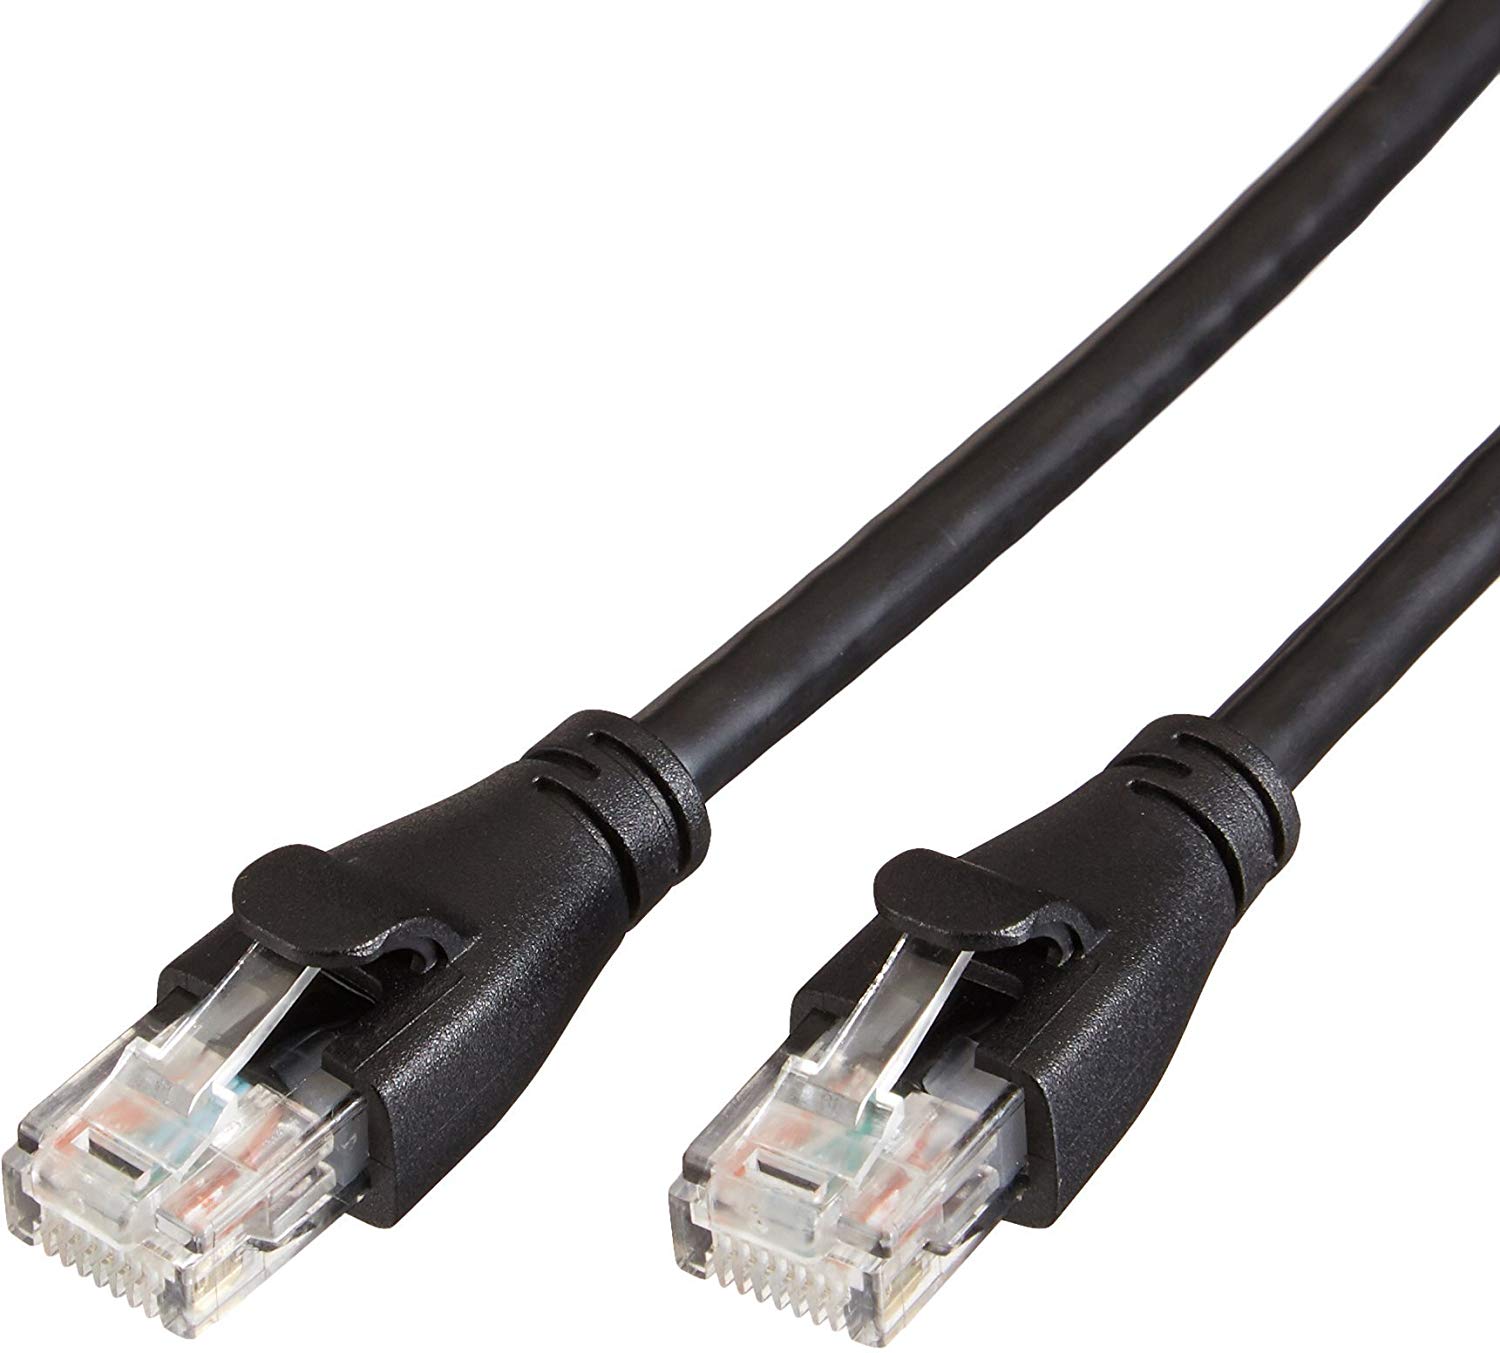 https://www.androidcentral.com/sites/androidcentral.com/files/article_images/2019/11/amazon-basics-cat-6-ethernat-cable.jpg?itok=ivrpijVX